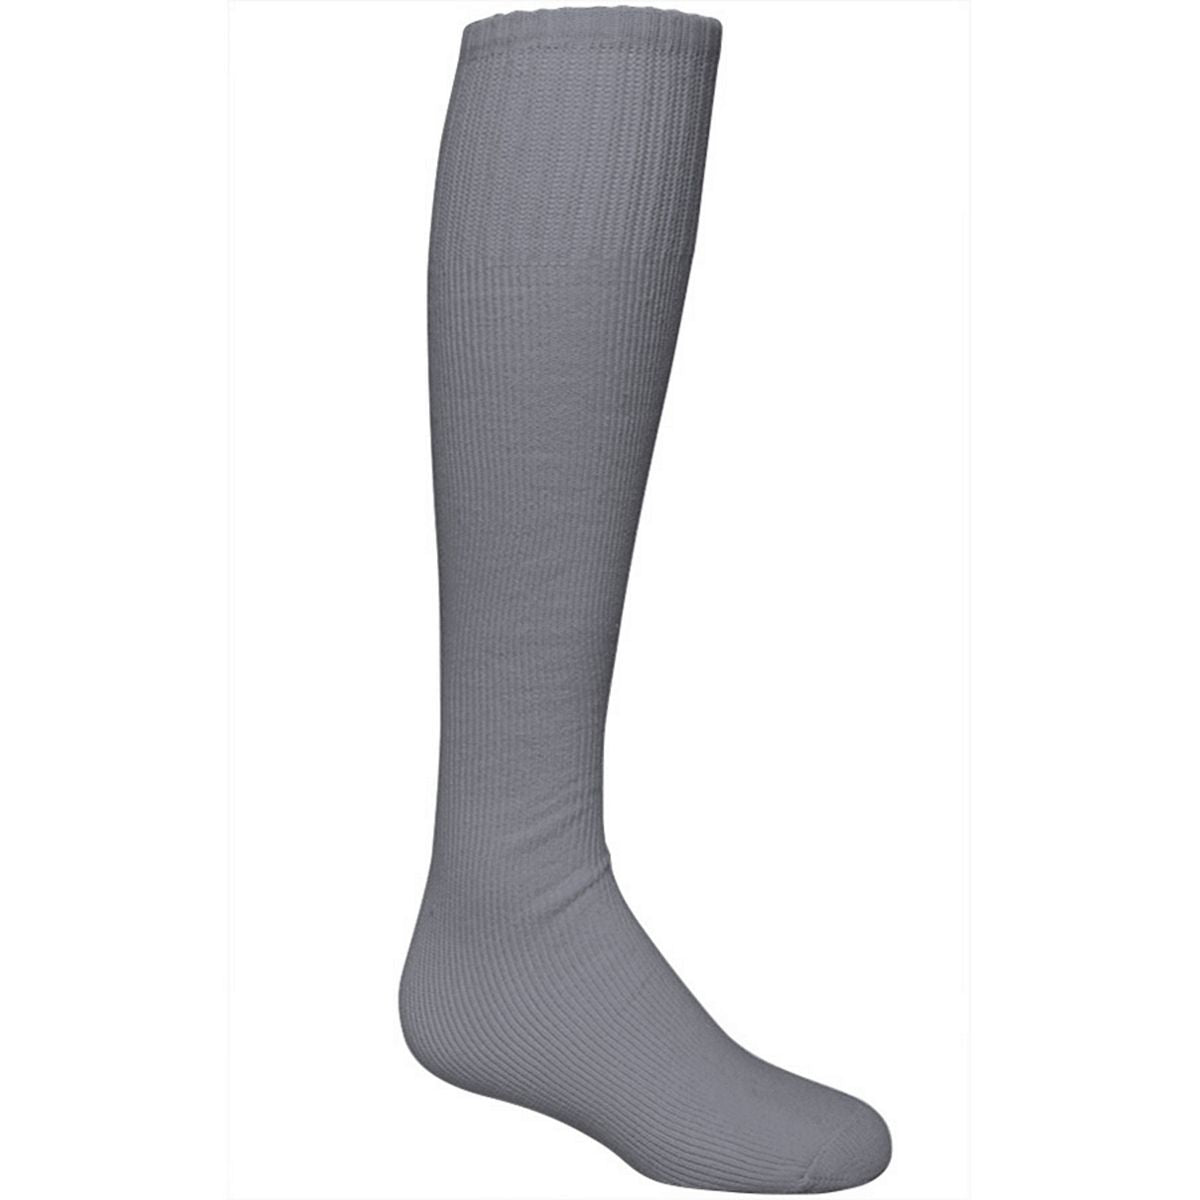 High 5 Athletic  Sock in Graphite  -Part of the Accessories, High5-Products, Accessories-Socks product lines at KanaleyCreations.com